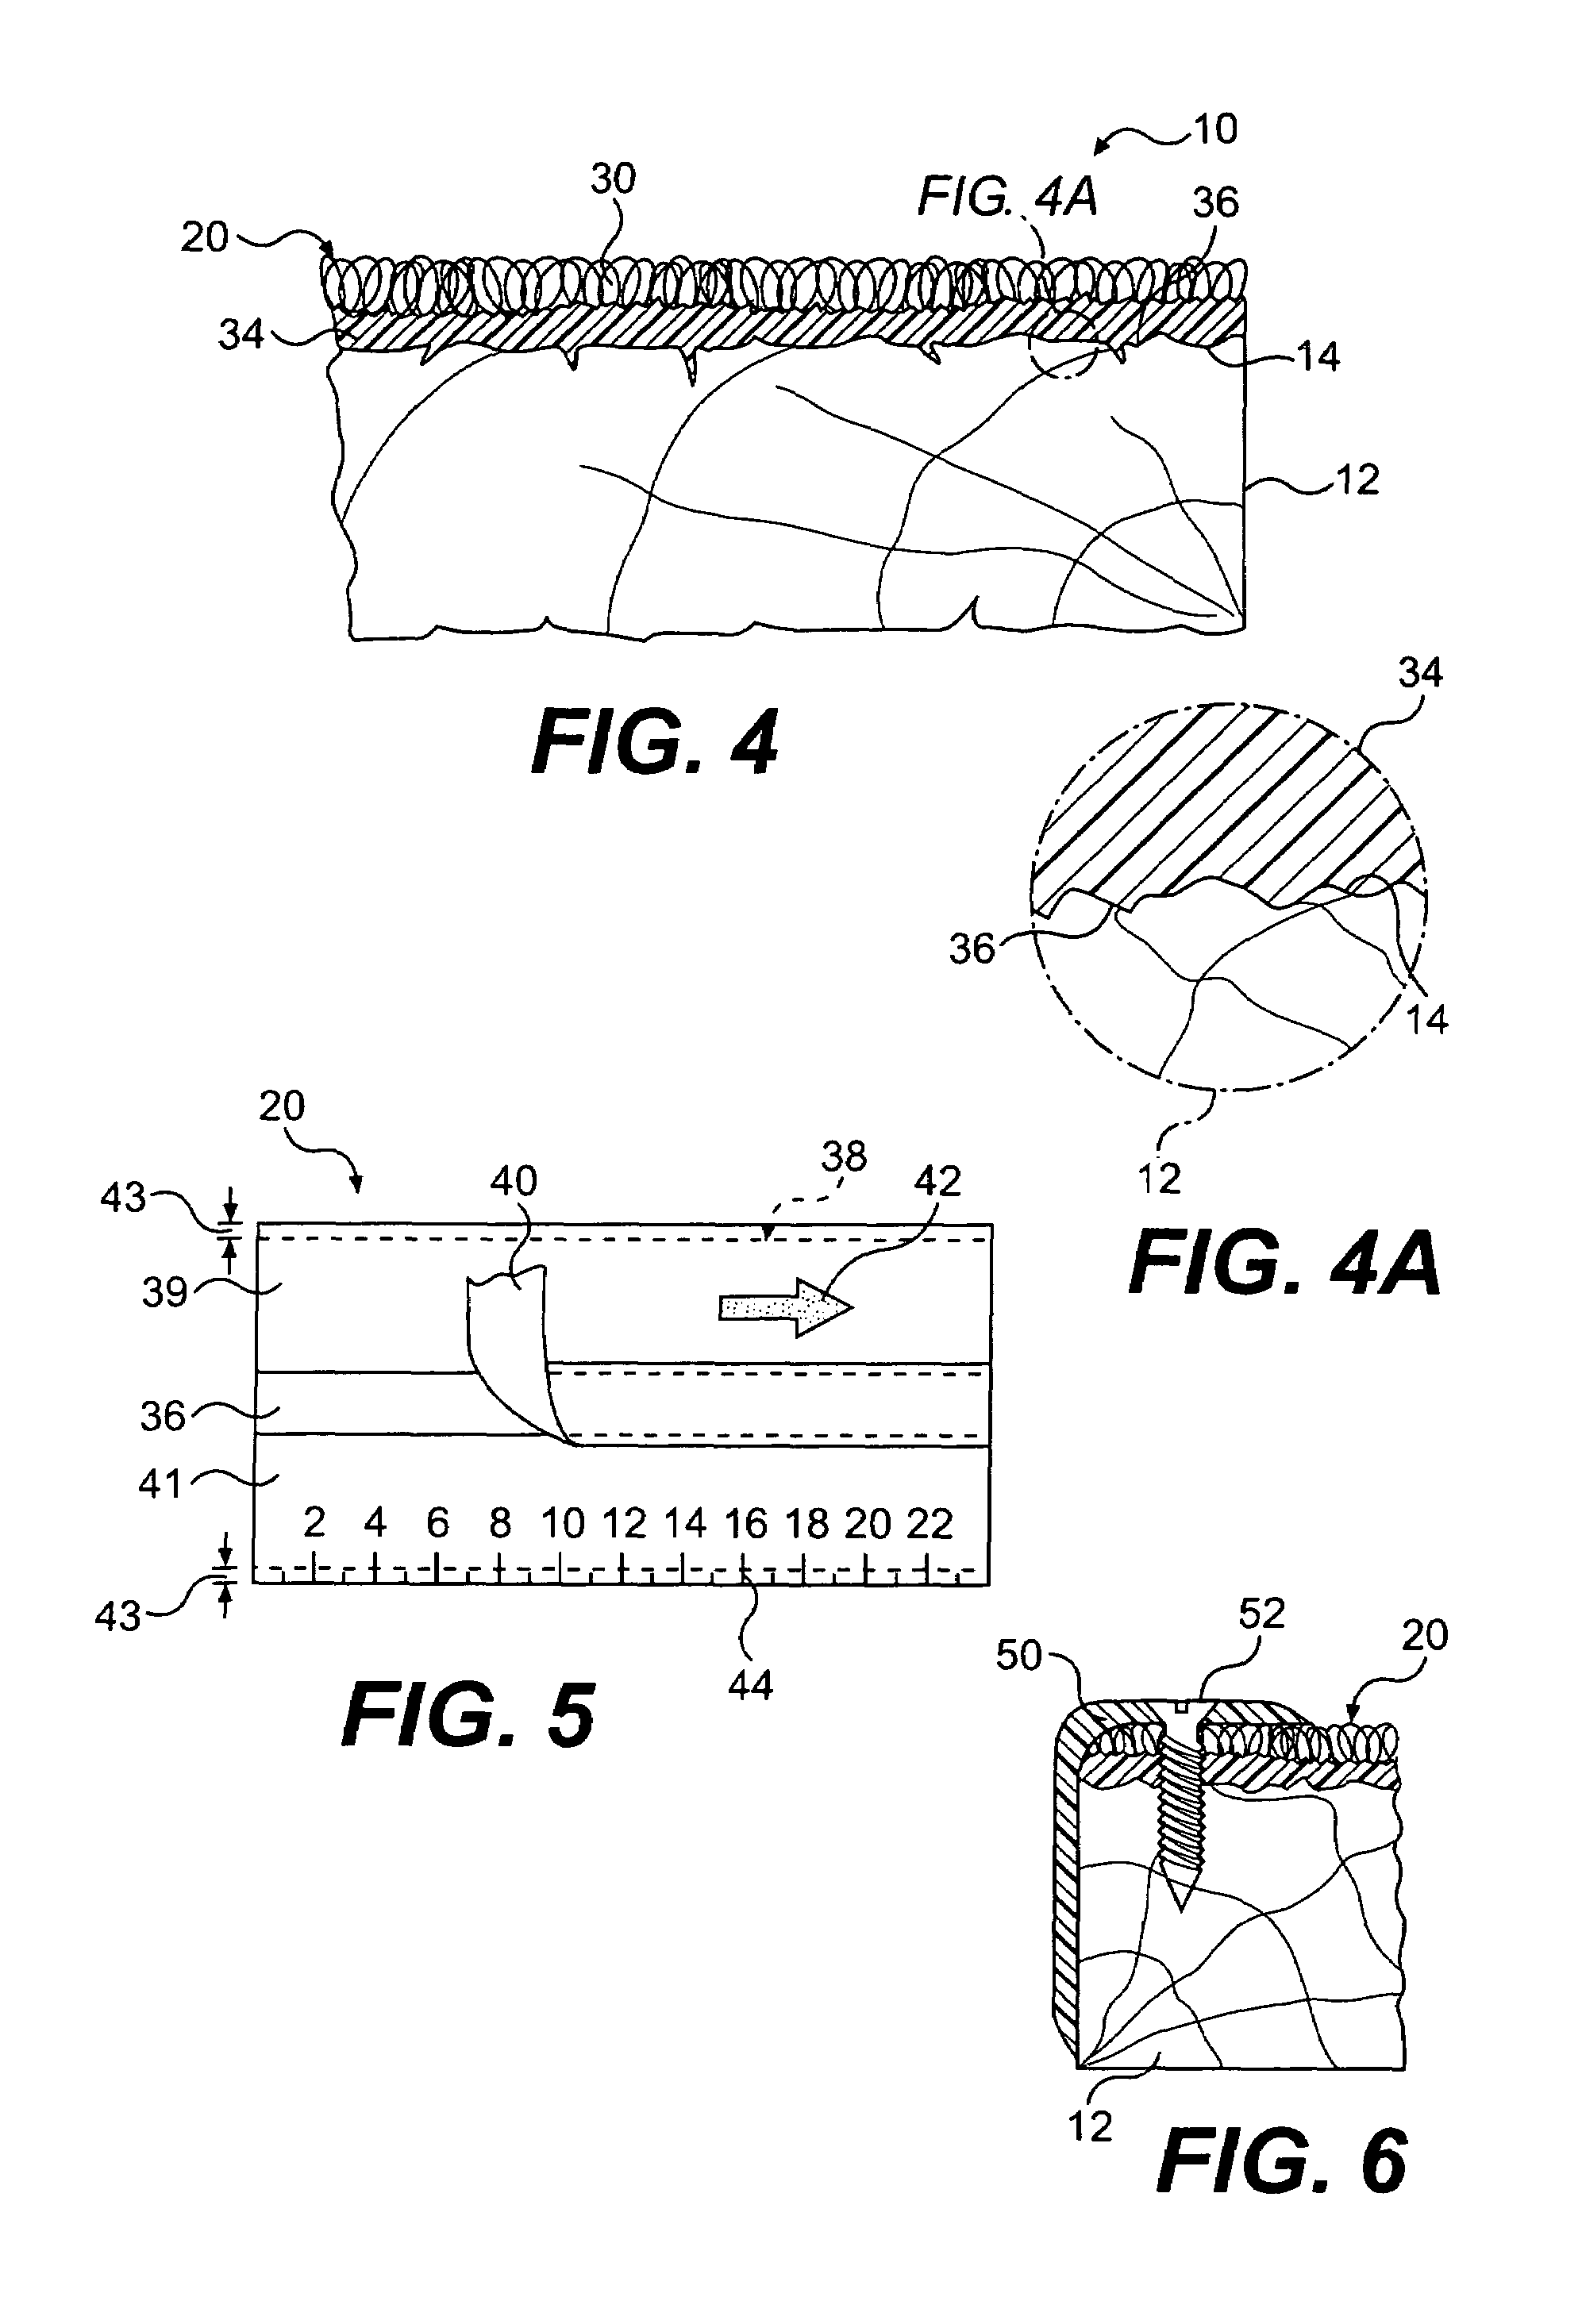 Method of applying a covering for boards